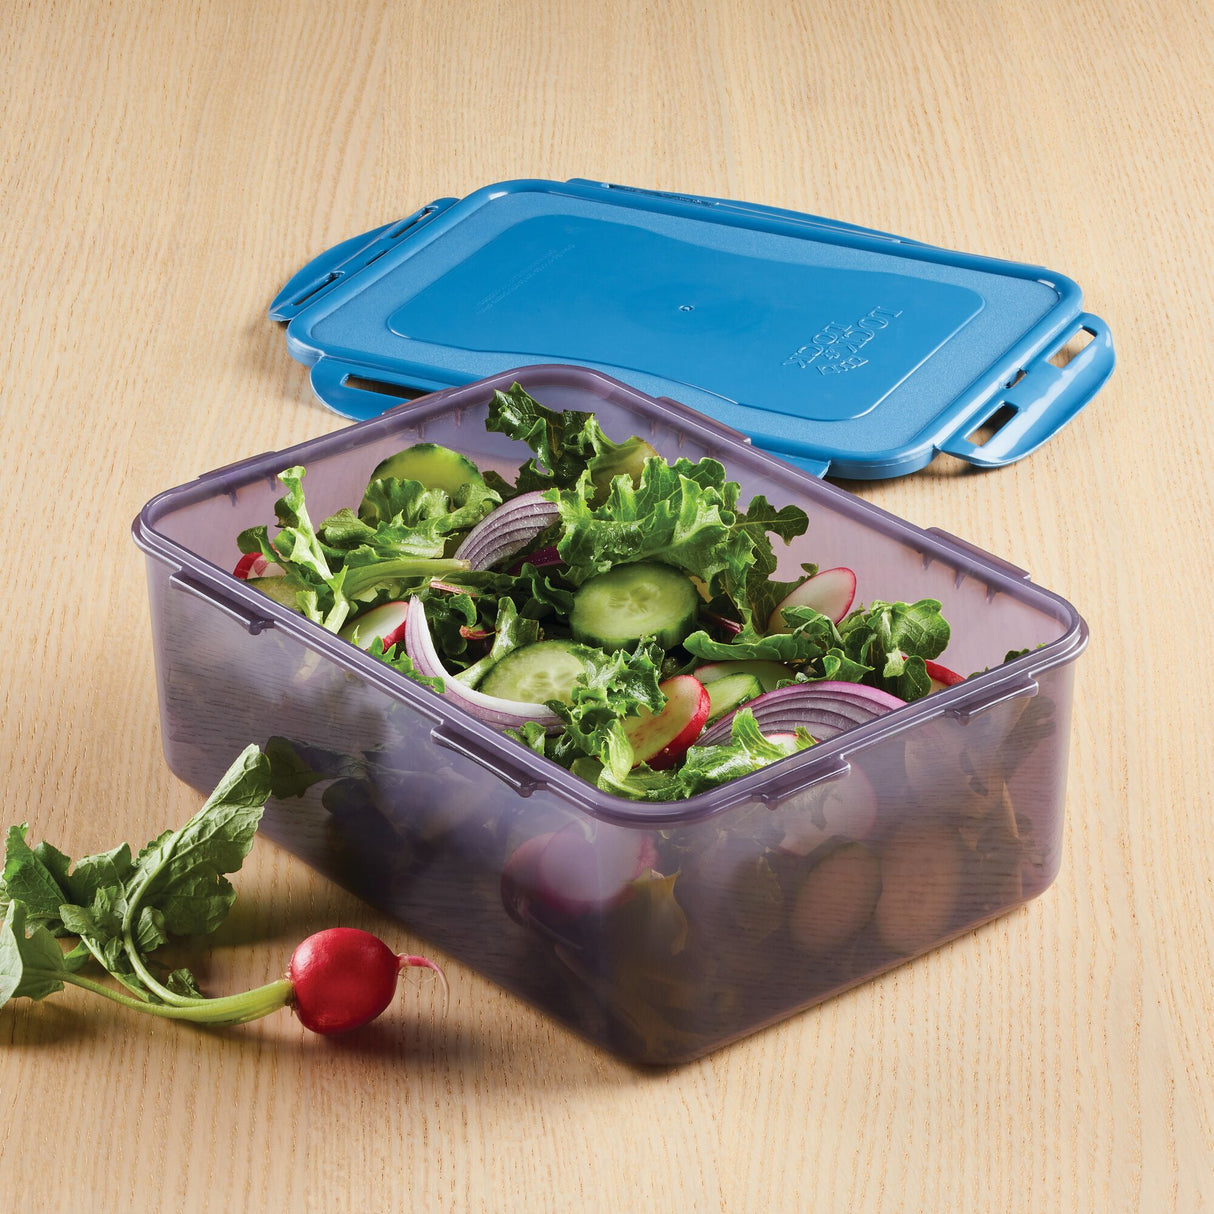 LocknLock Rectangular Eco Food Containers with Lids, 5 x 1L